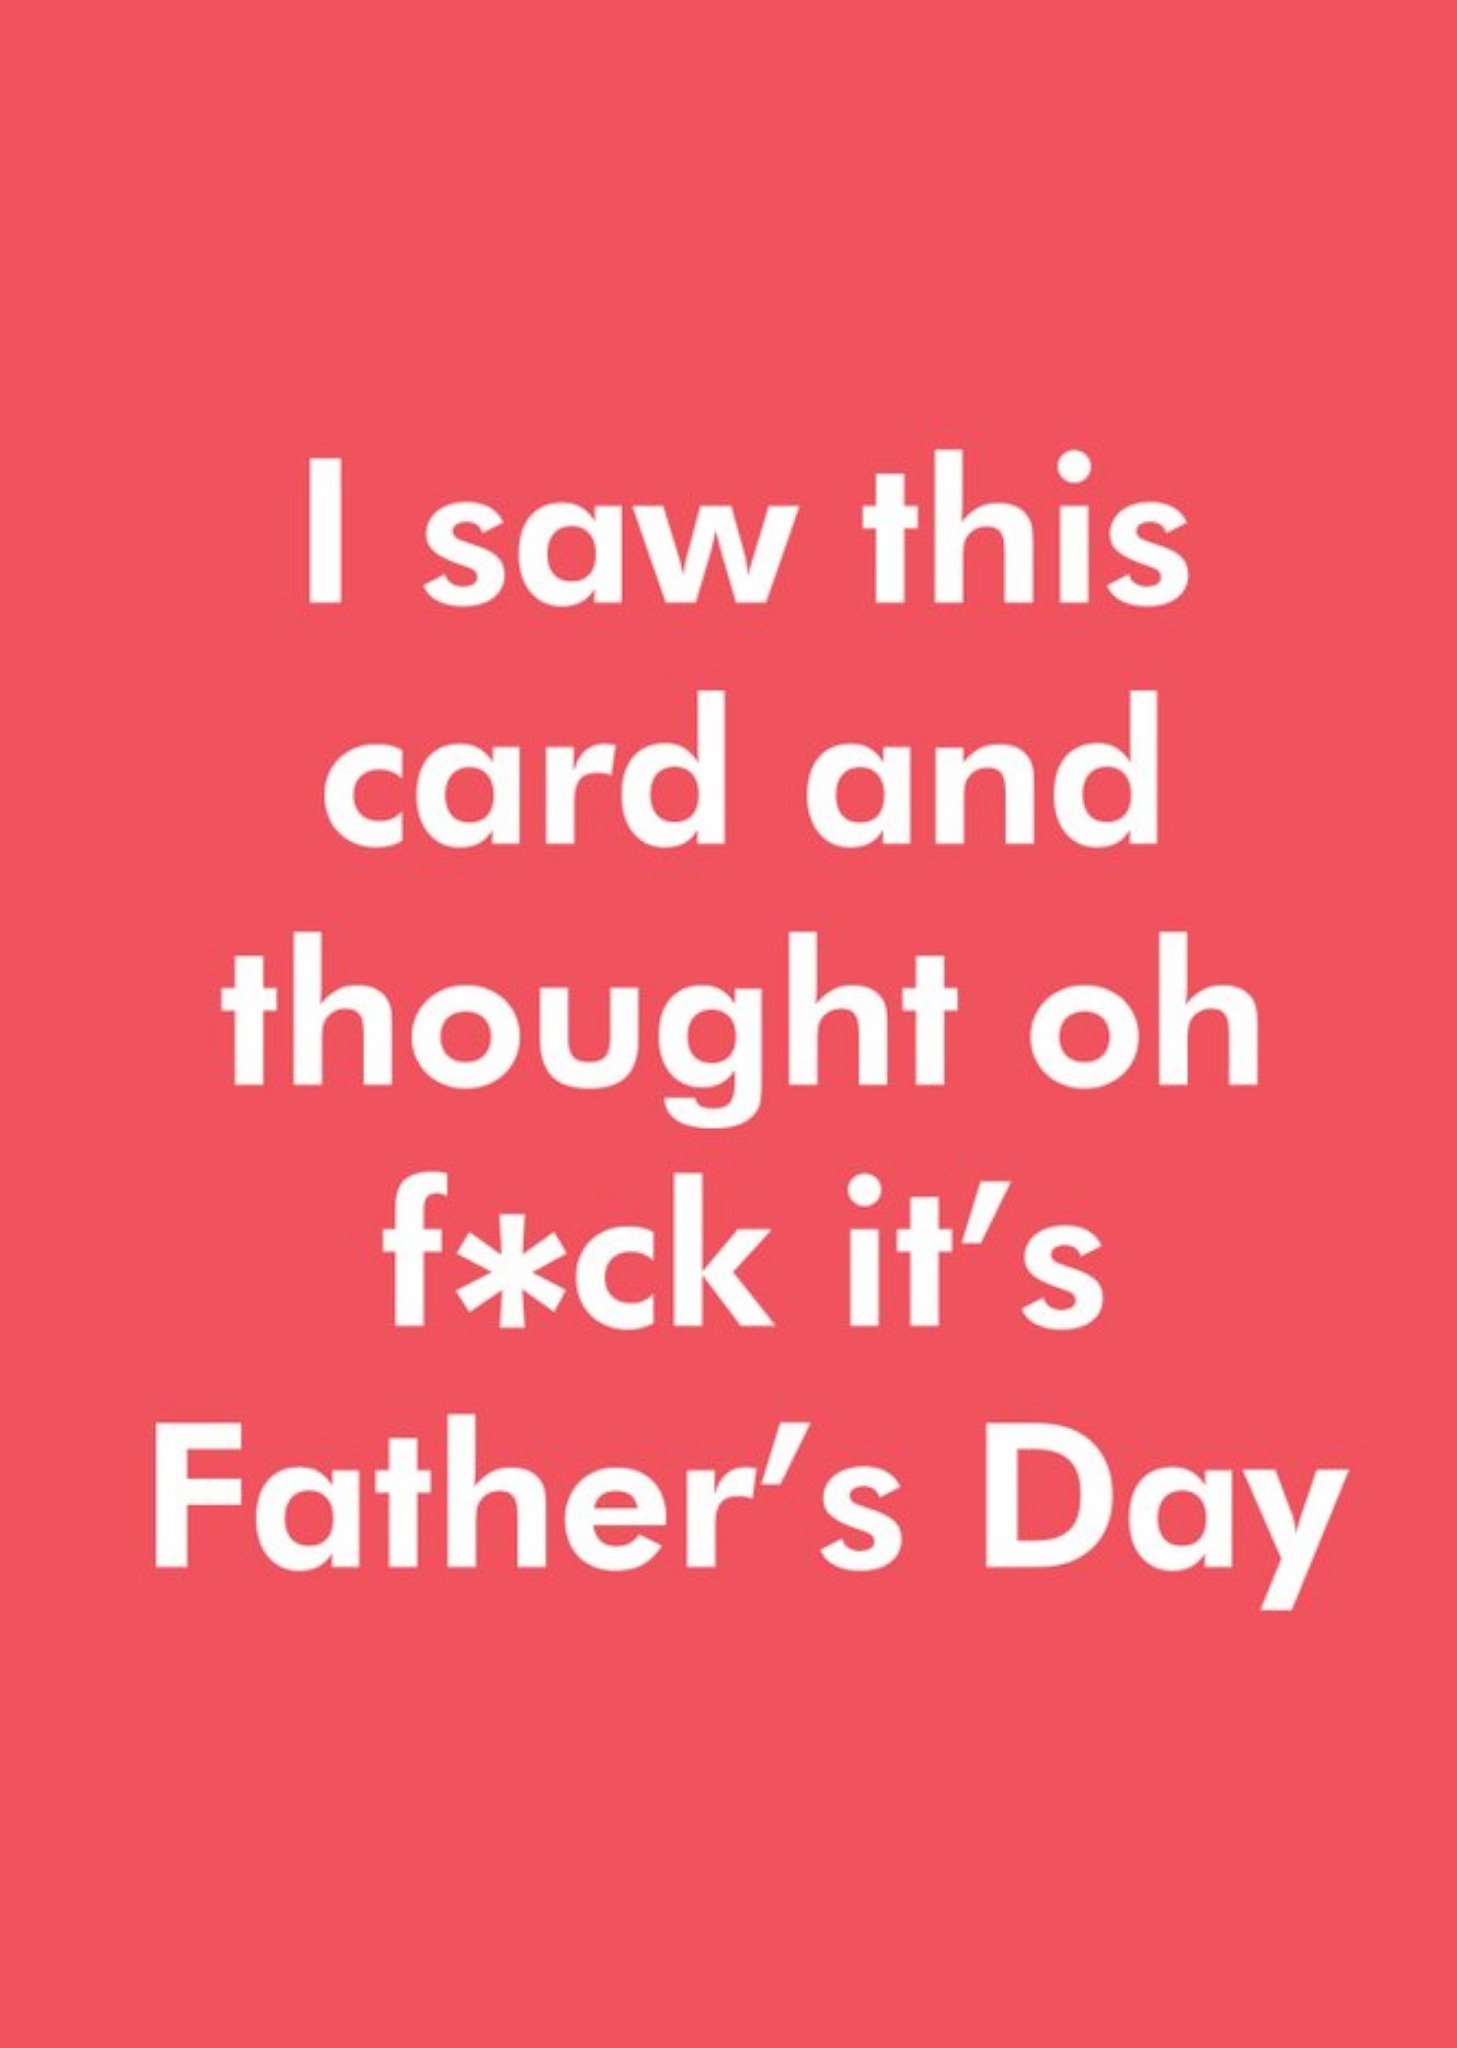 Moonpig Objectables Fuck It's Father's Day Card Ecard